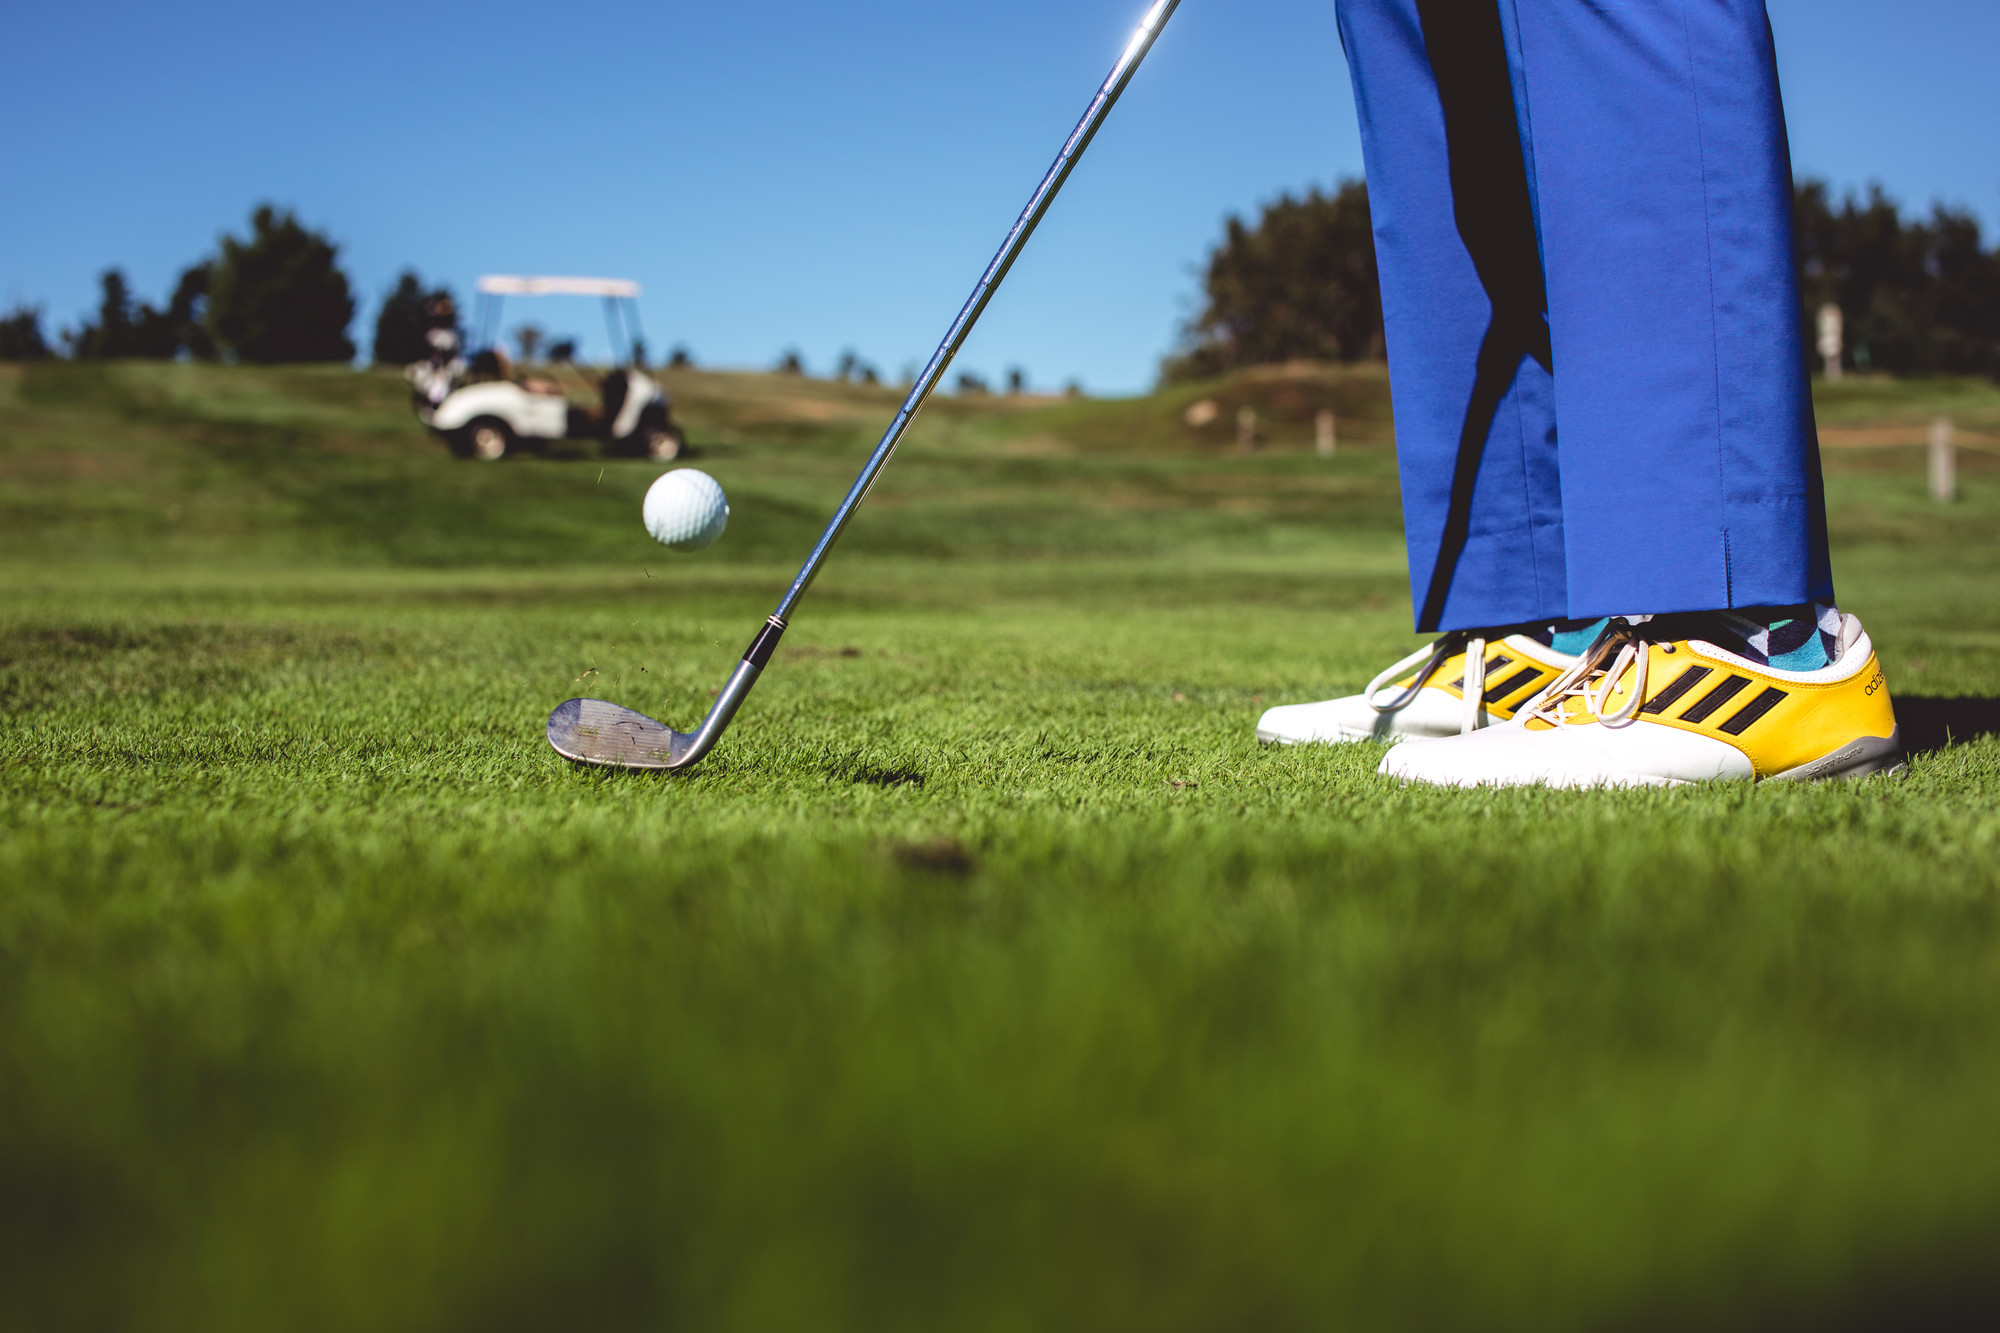 Close-up of a golfer's feet as he strikes the ball with cart in background.